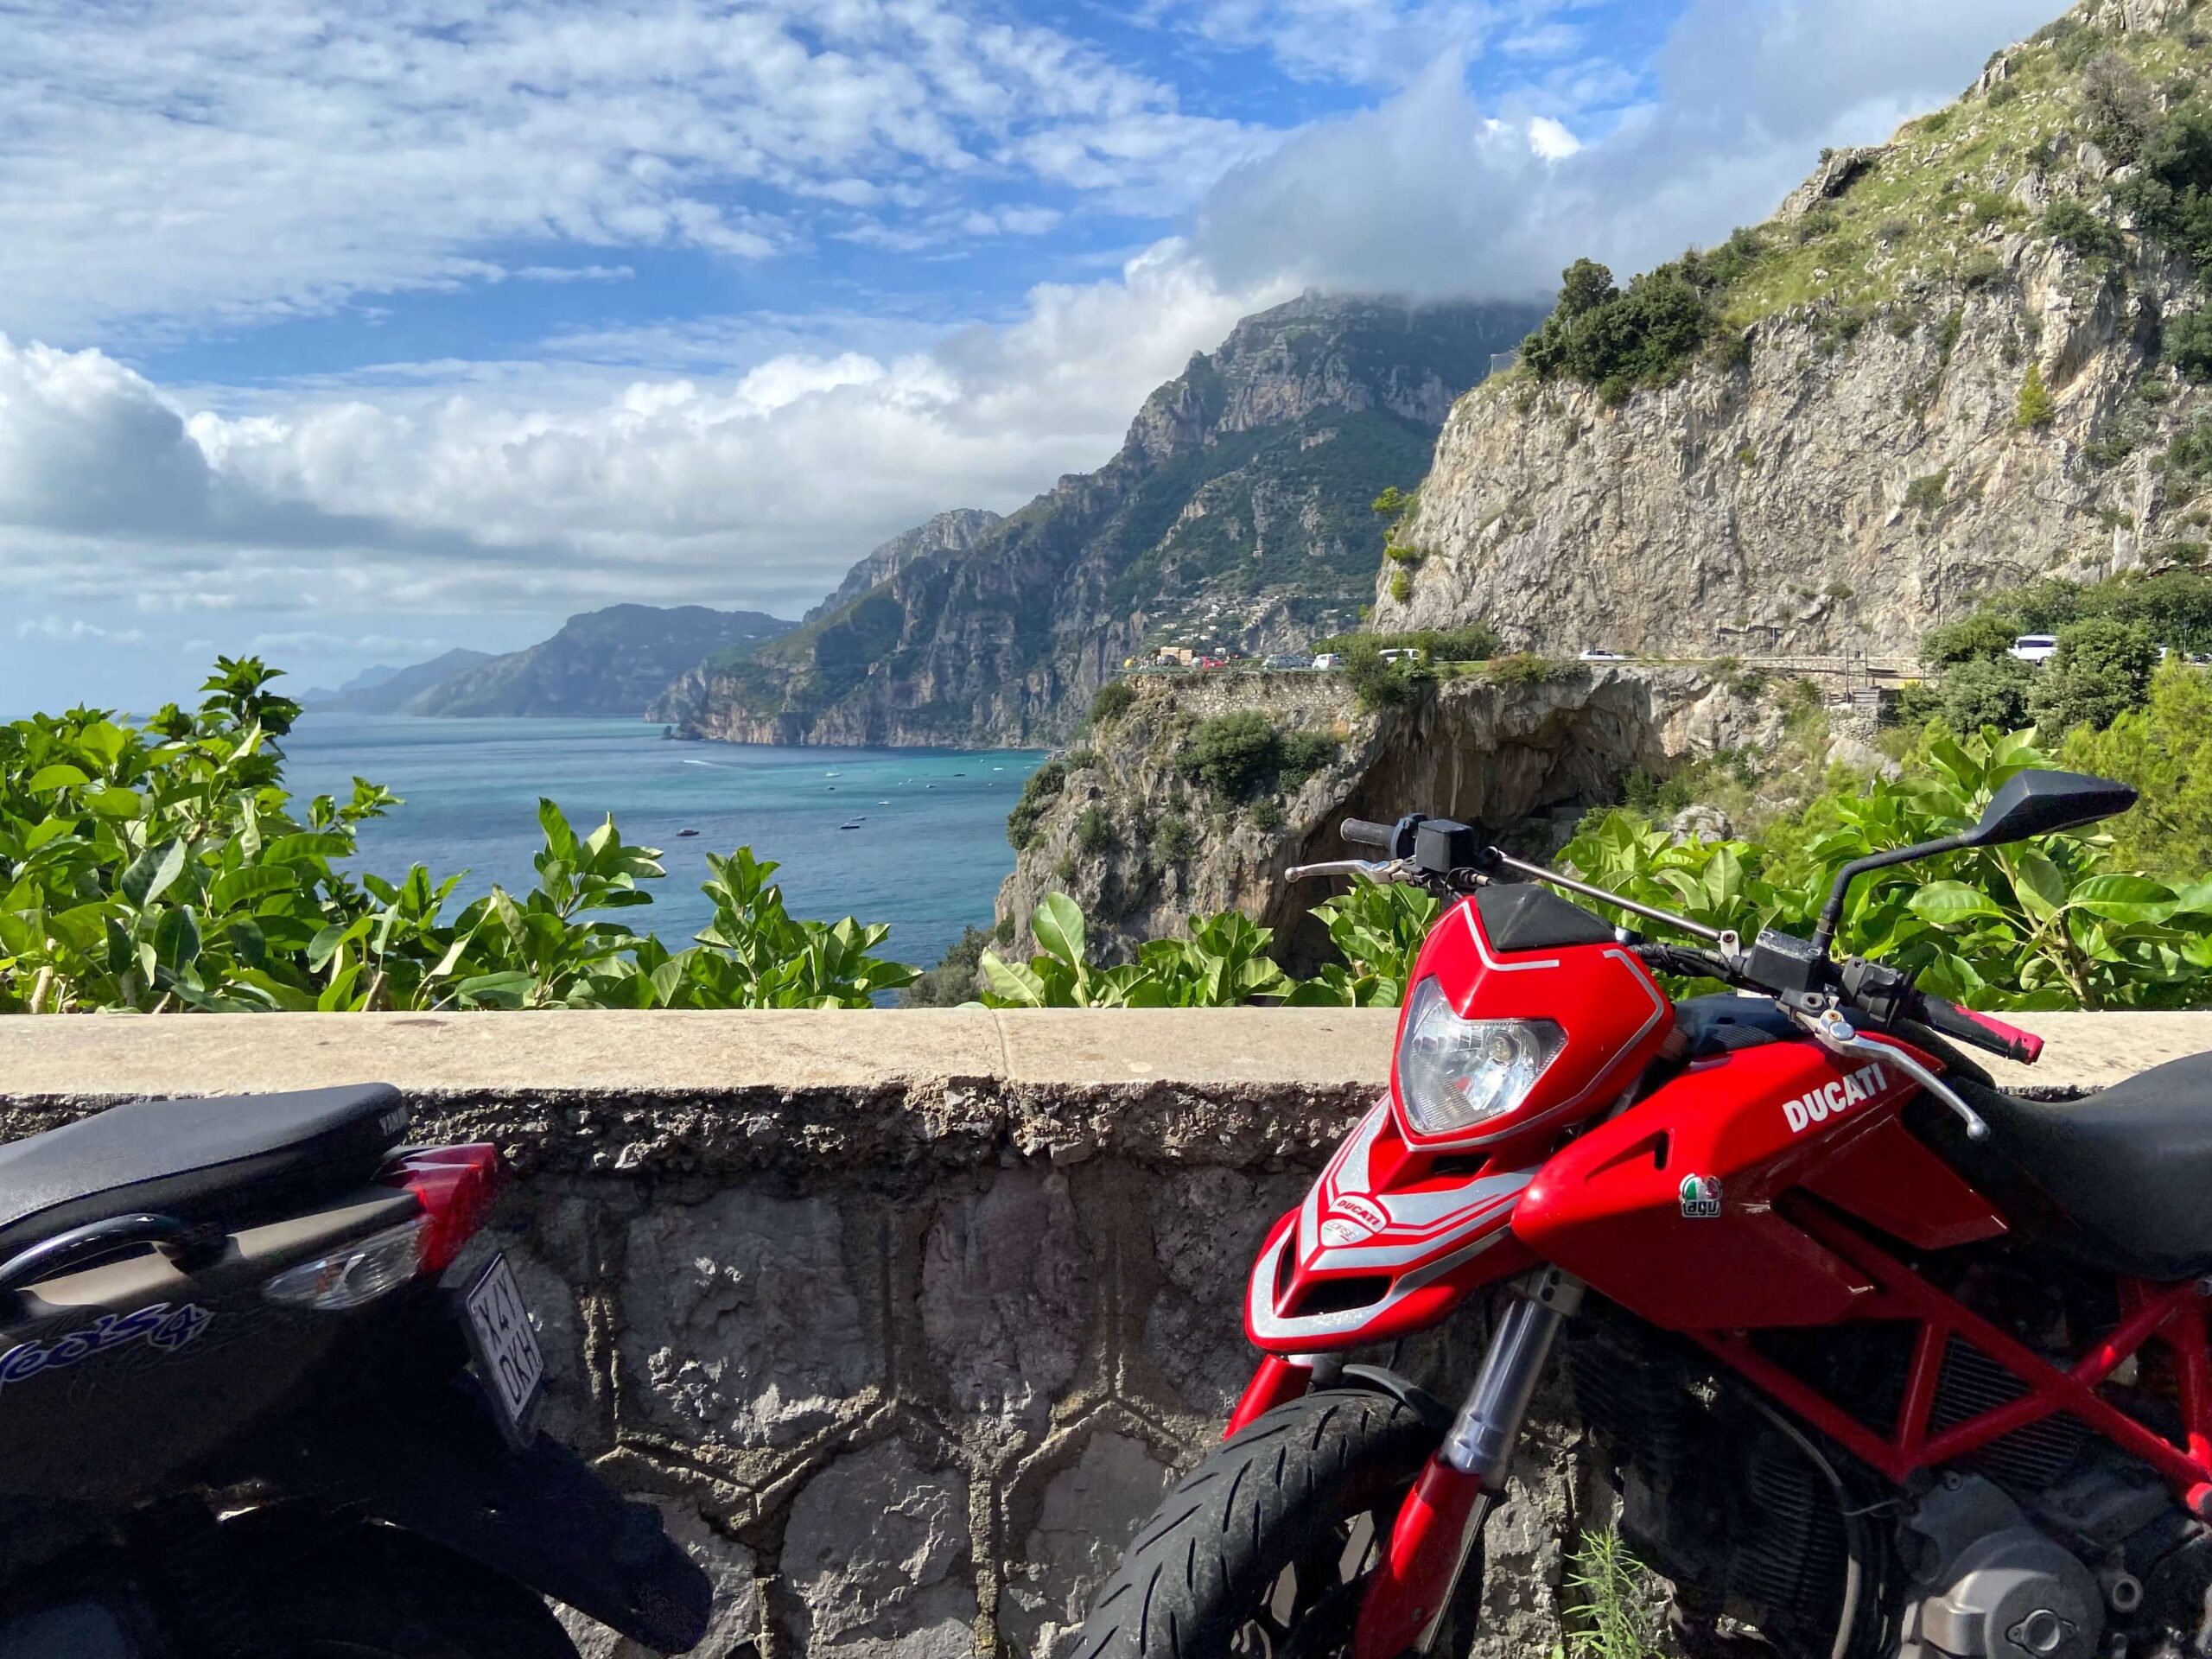 Motorbike and Scooter parked up with the Amalfi Coastline behind them.